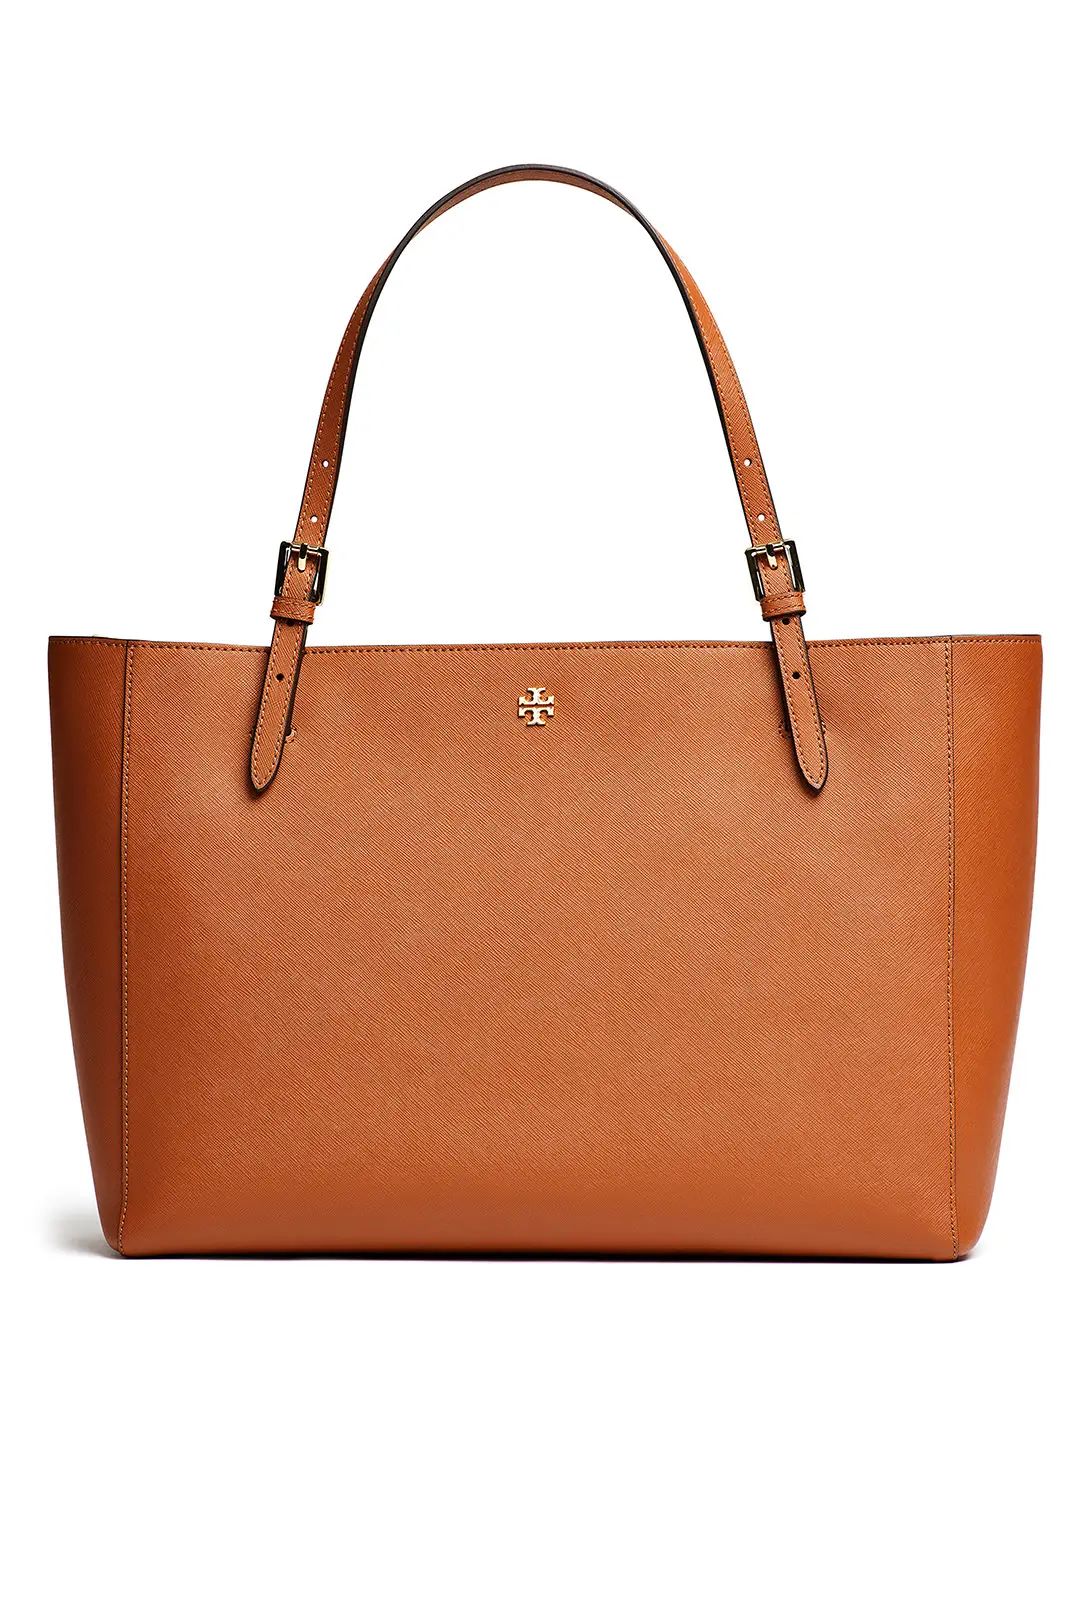 Tory Burch Accessories Luggage York Buckle Tote | Rent The Runway